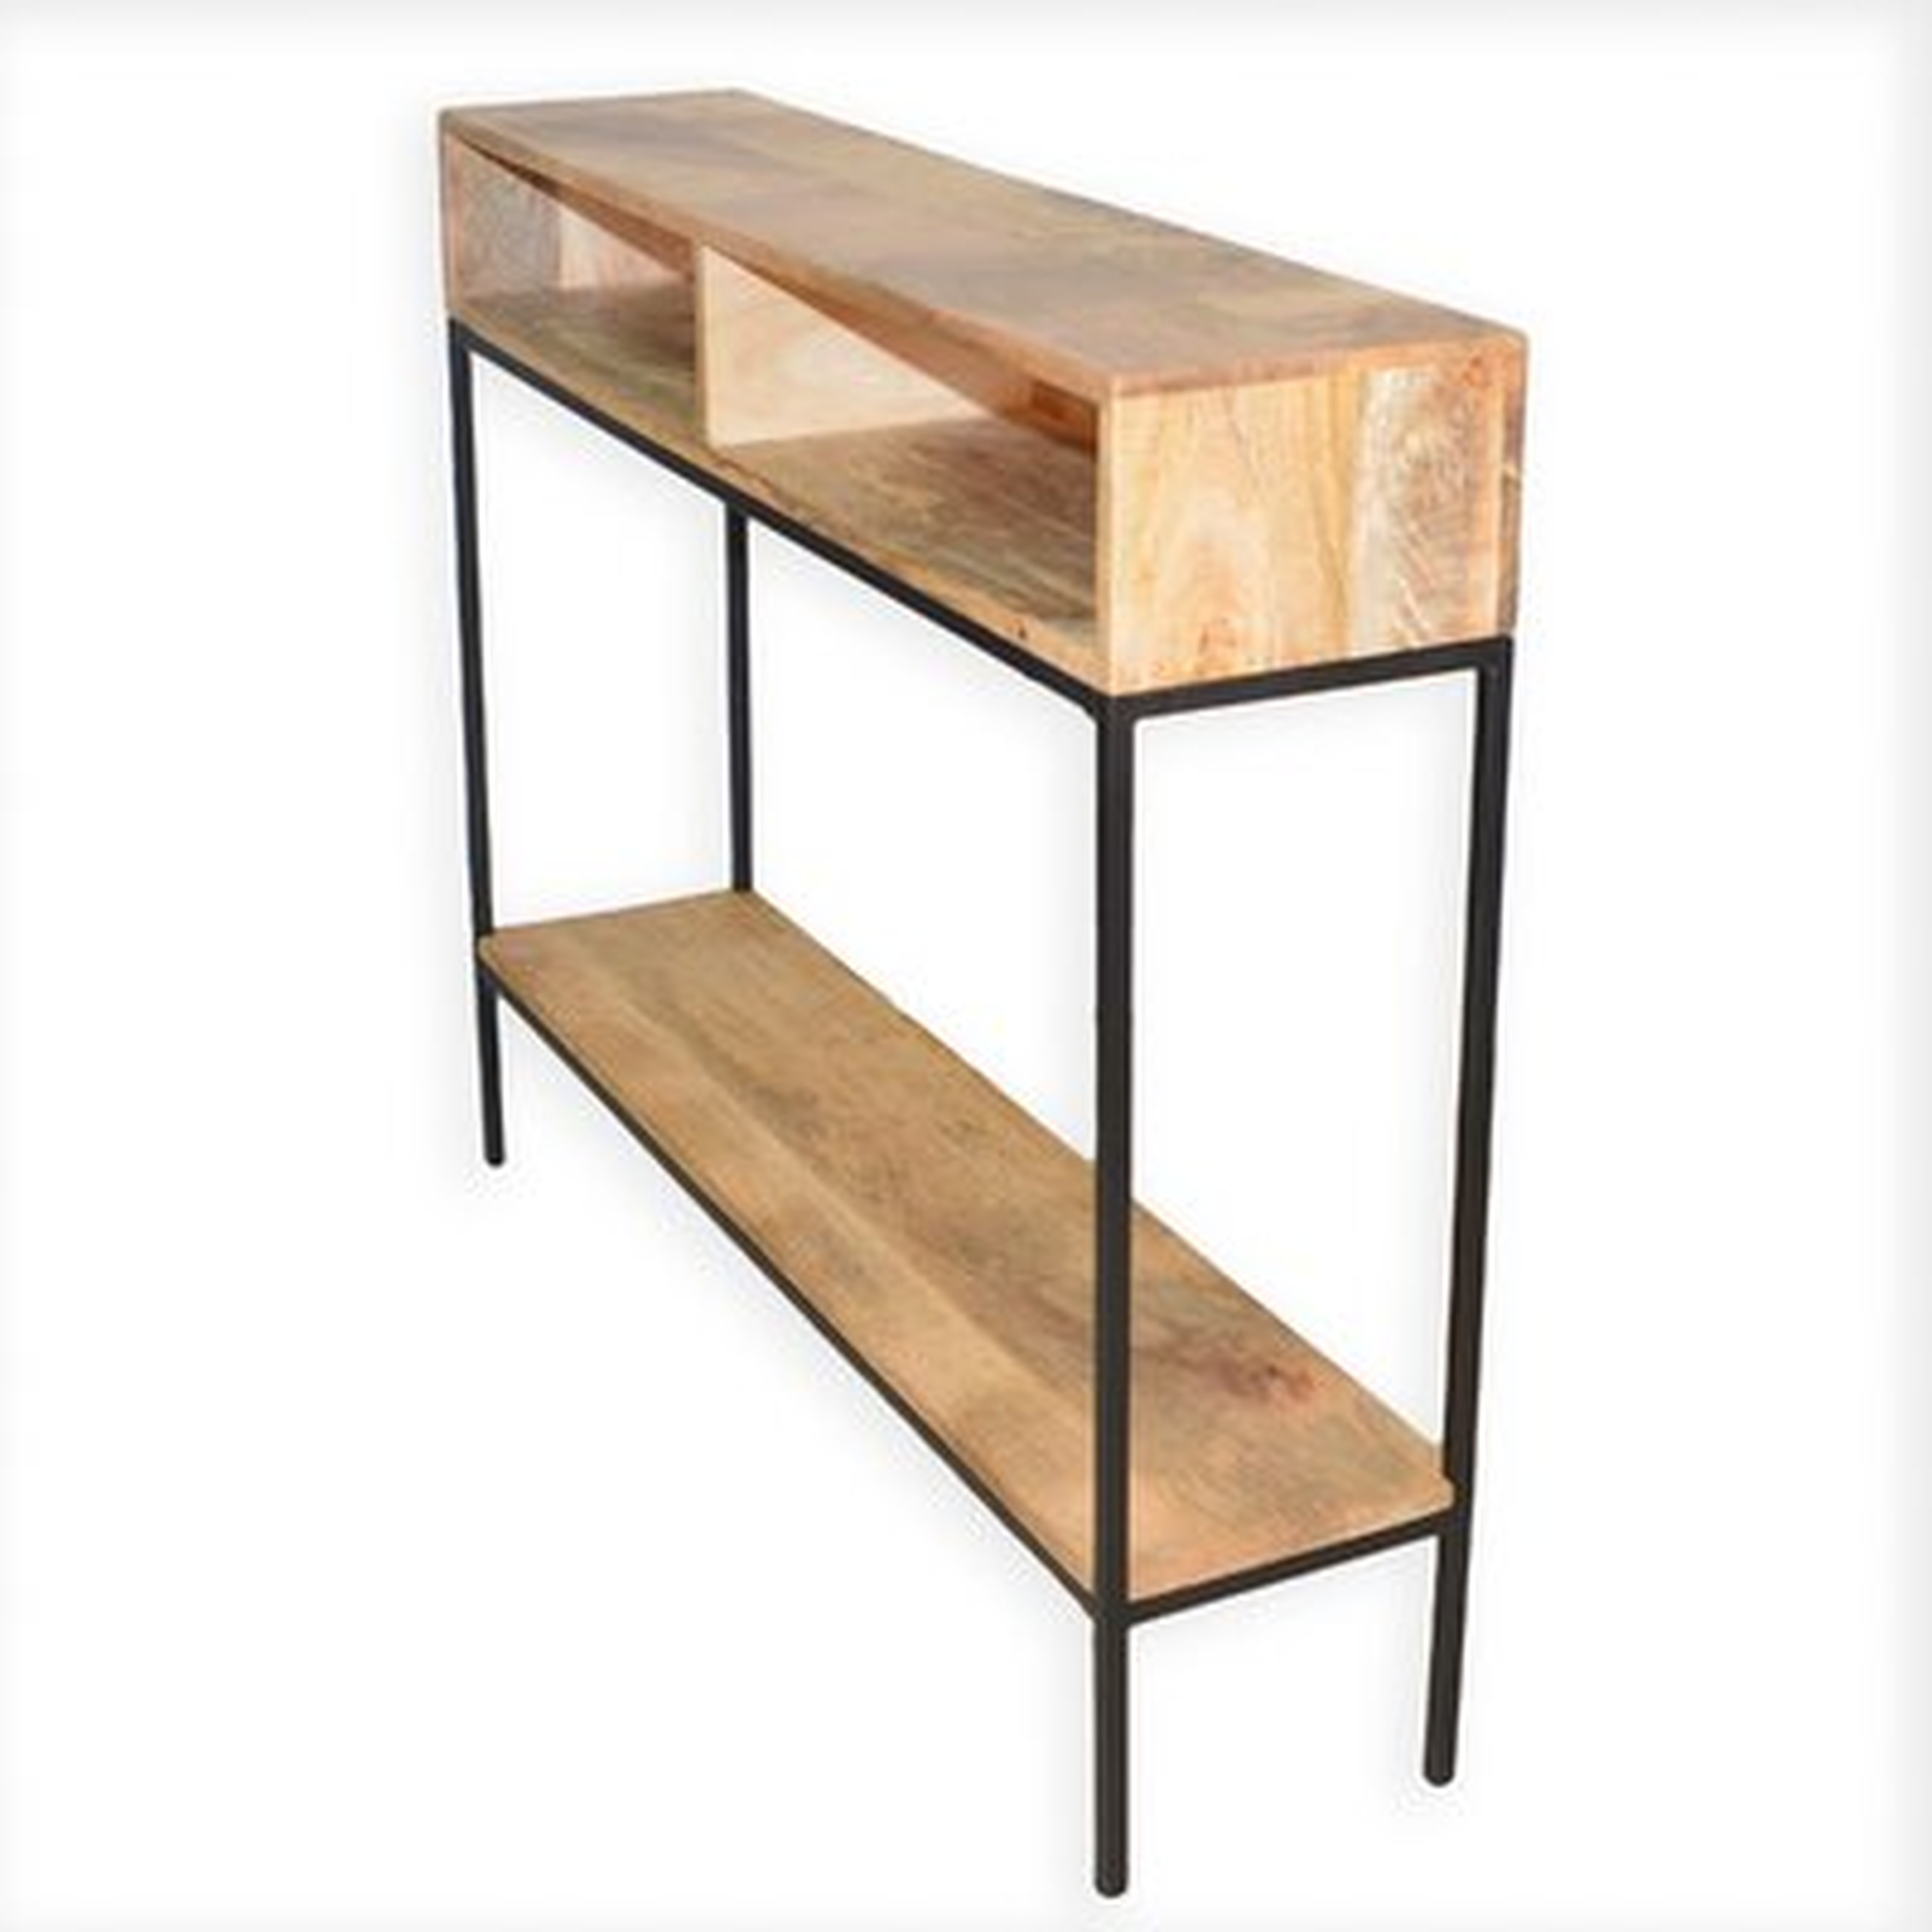 Marley 42" Solid Wood Console Table - AllModern